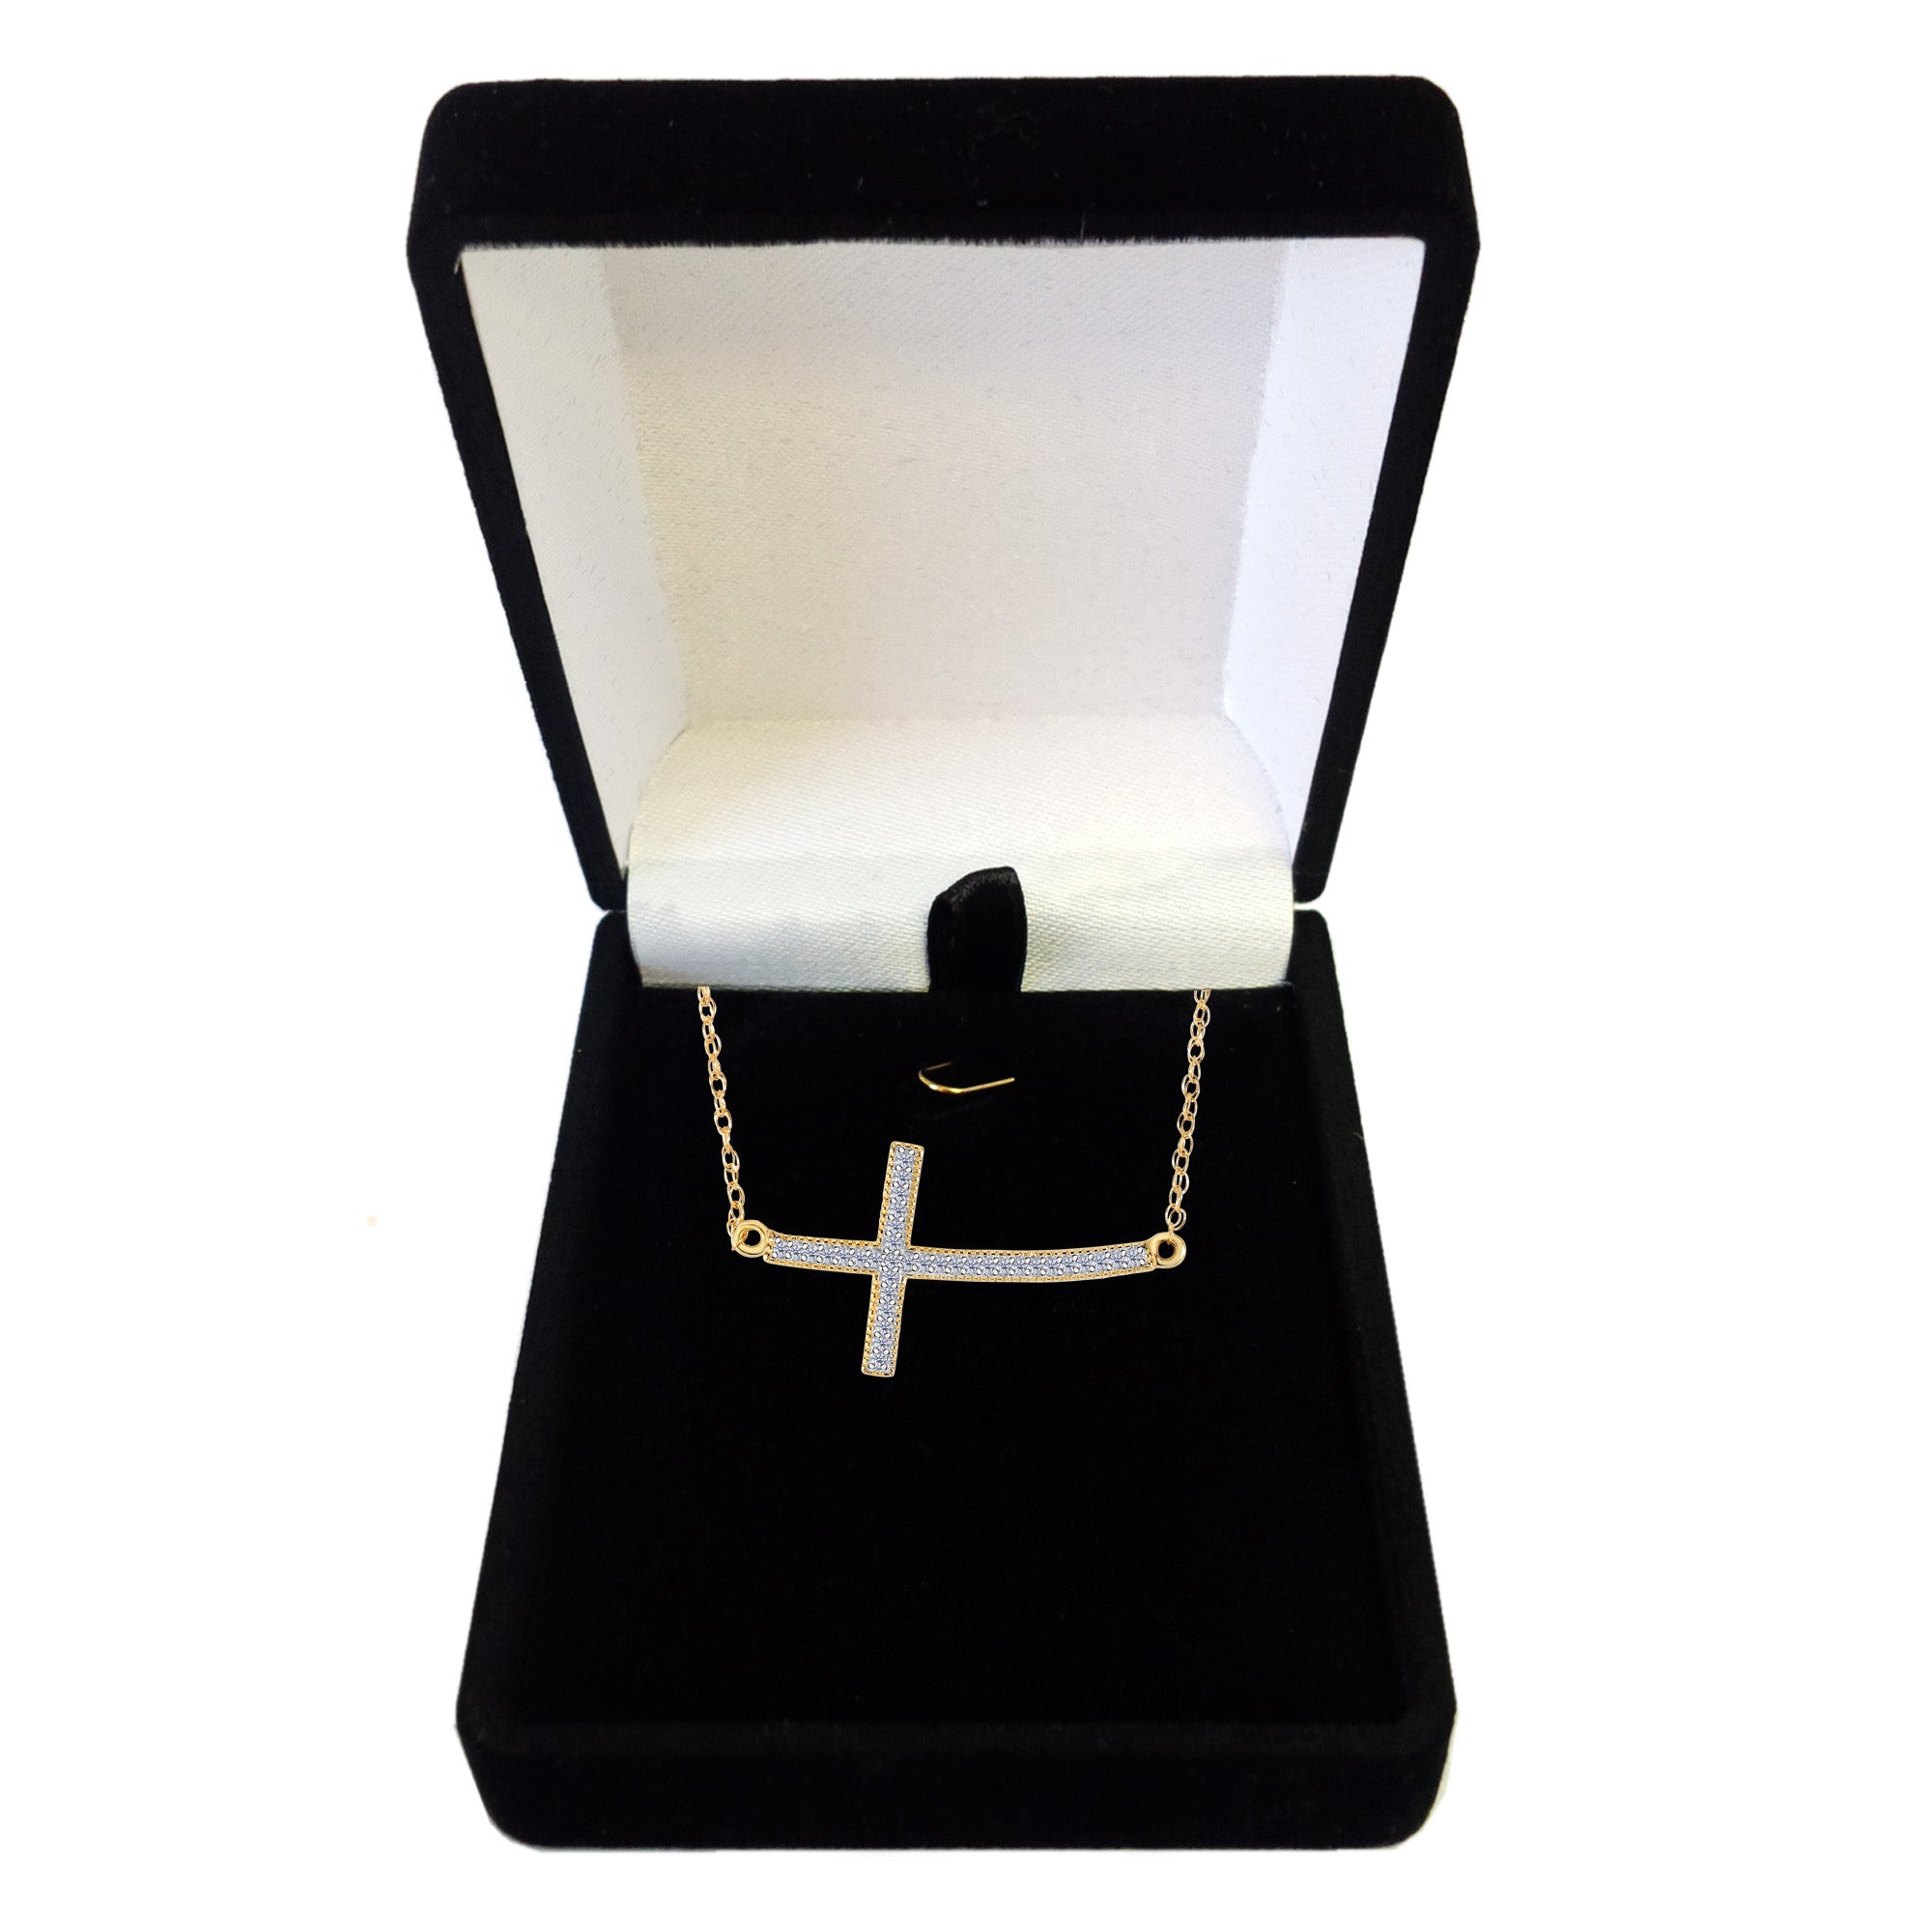 14k Yellow Gold With 0.08ct Diamonds Curved Side Ways Cross Millgrain Necklace - 18 Inches fine designer jewelry for men and women